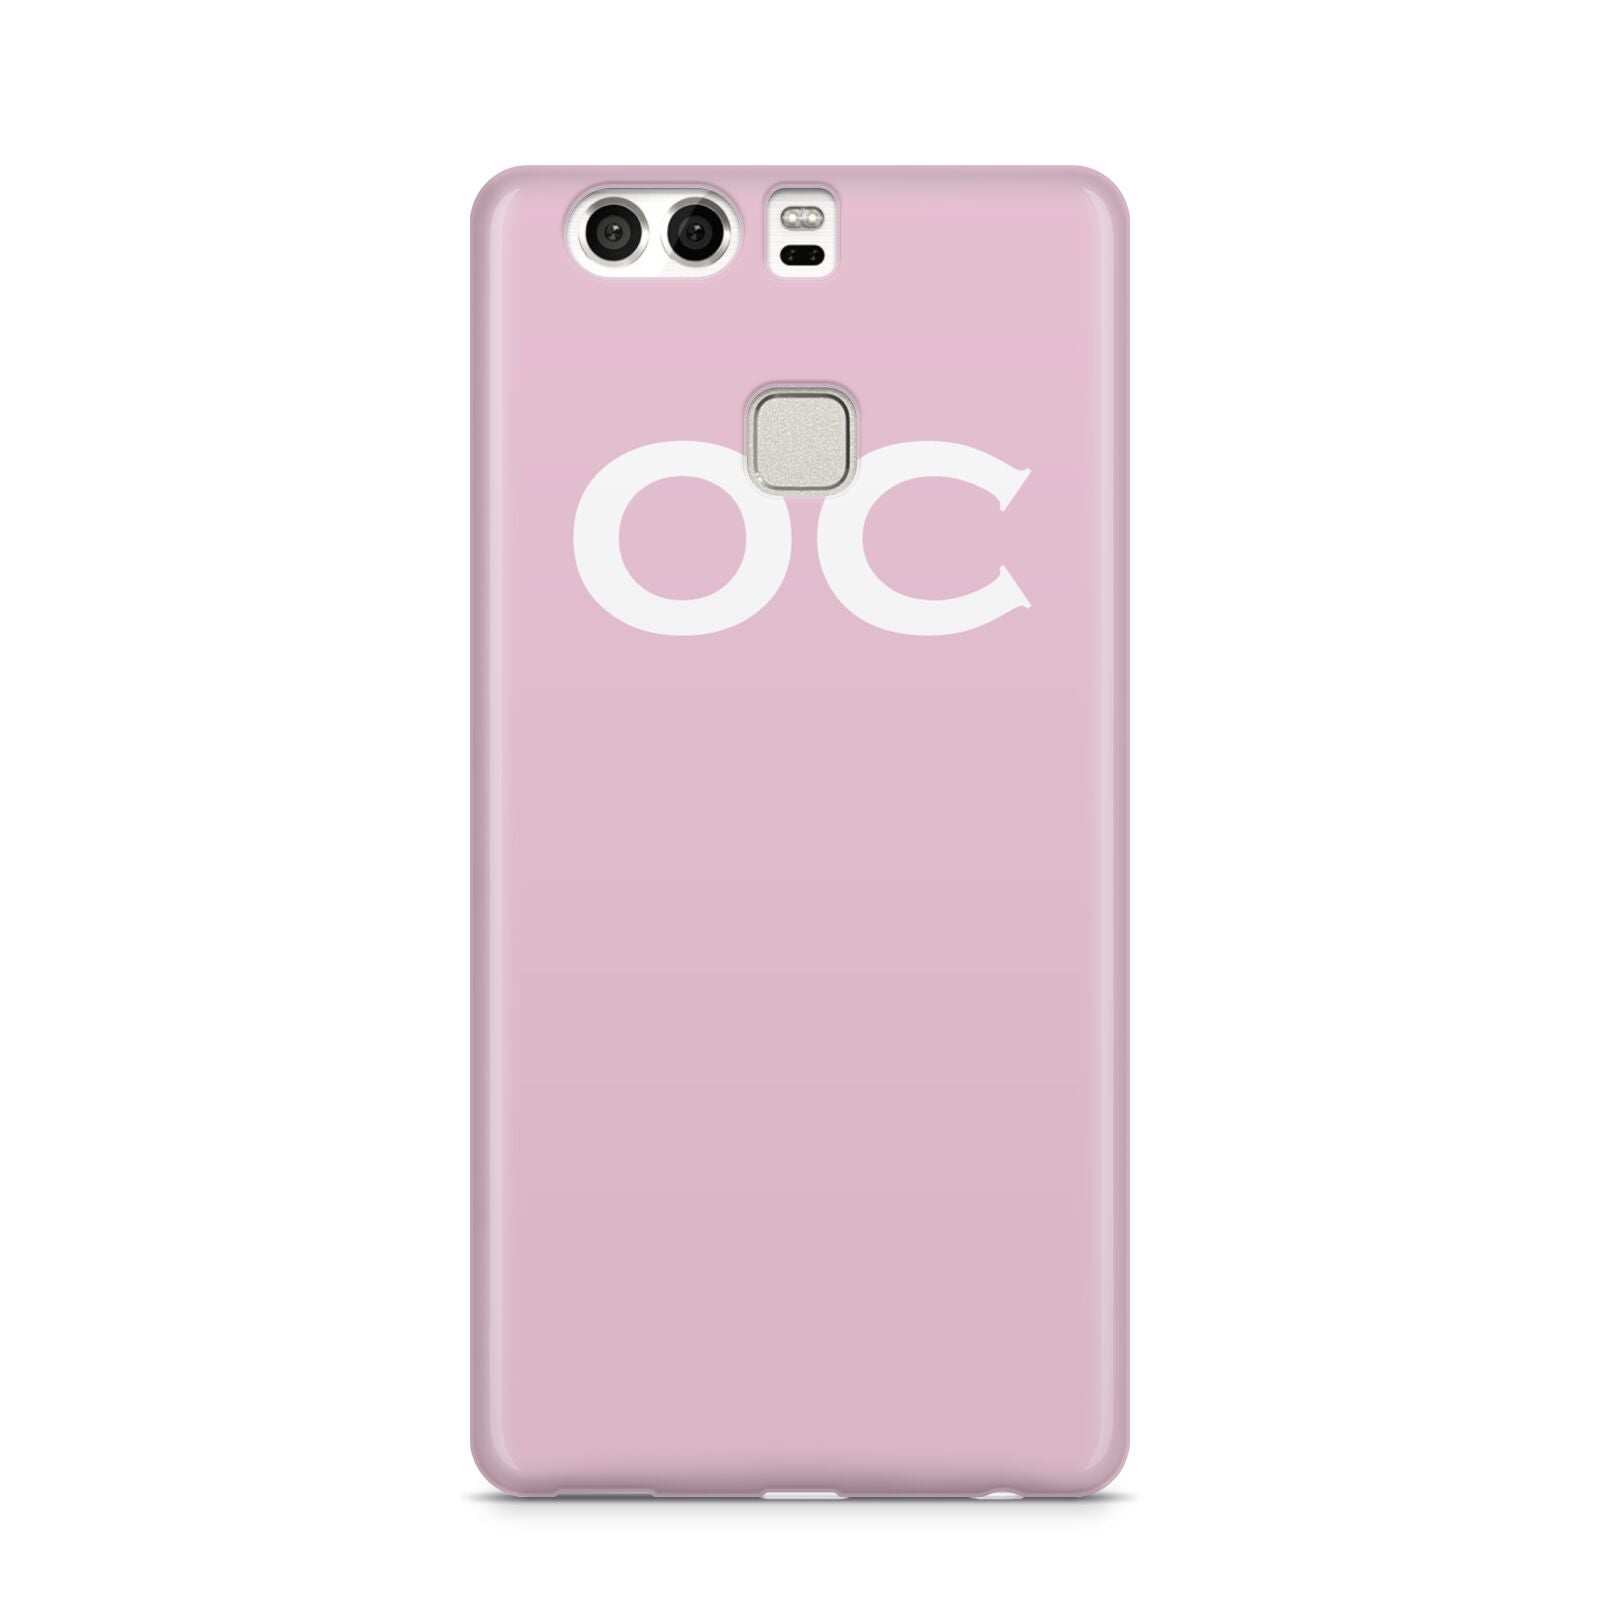 Personalised Initials 2 Huawei P9 Case